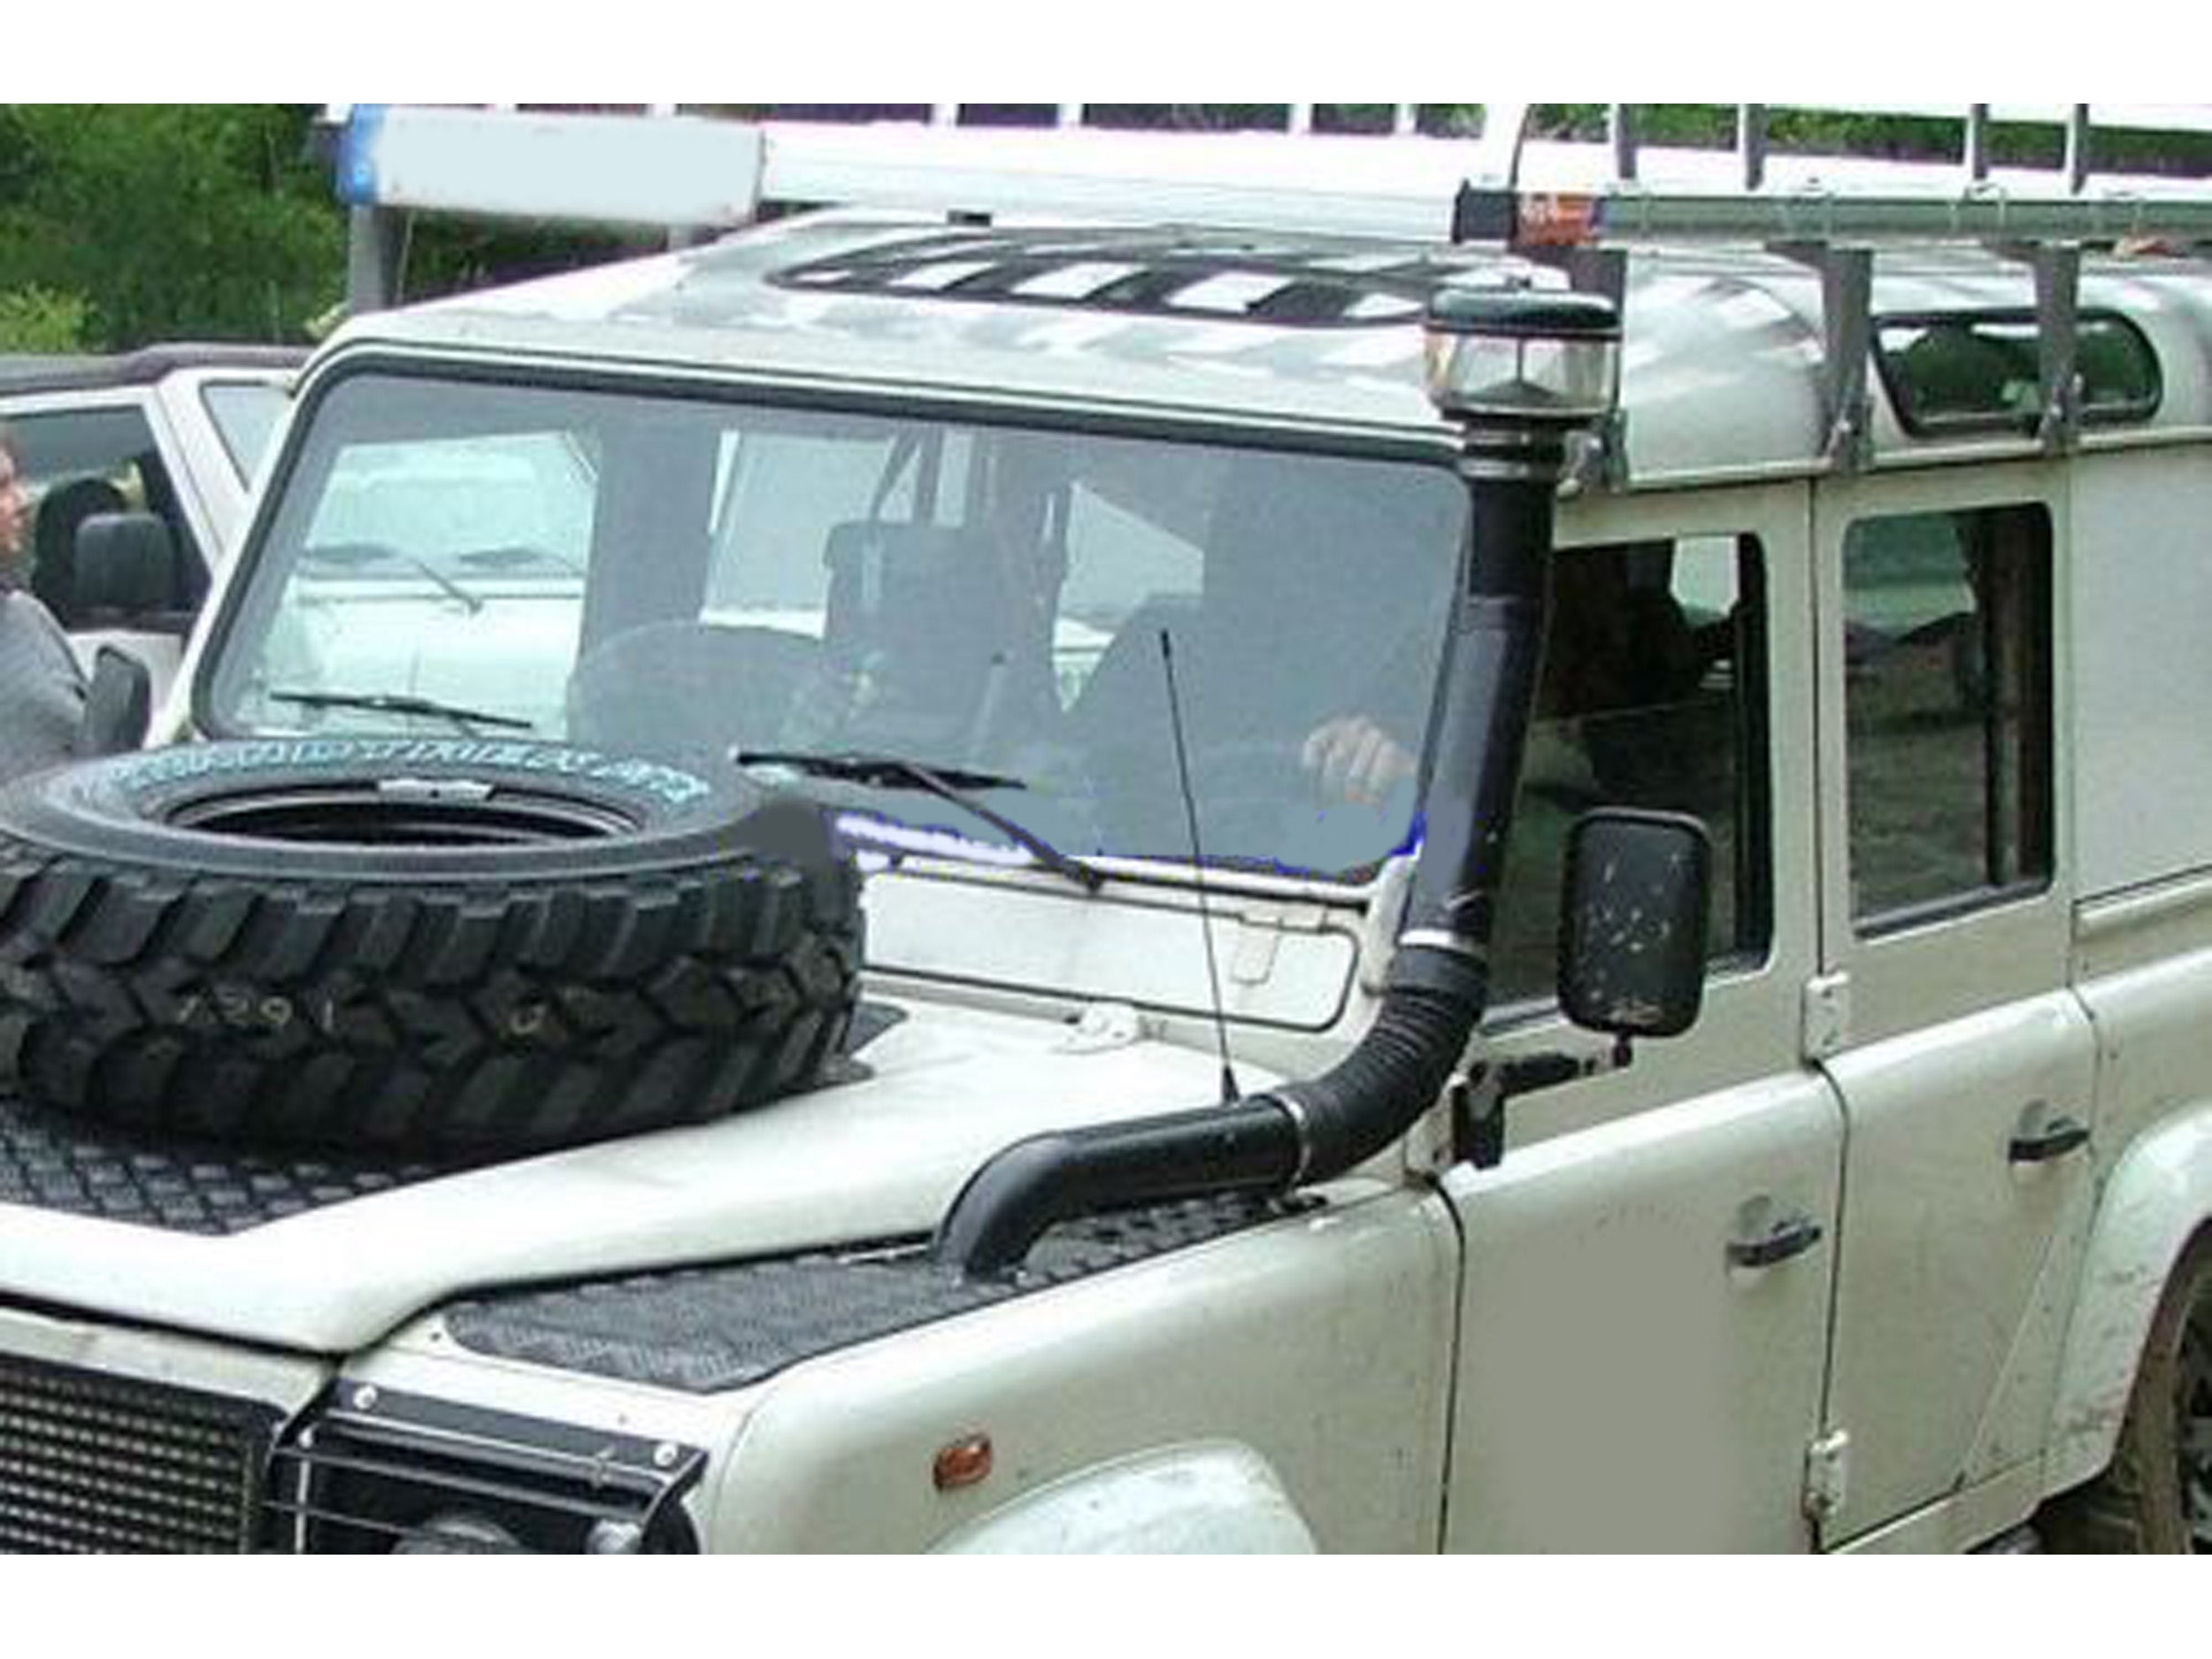 Raised Air Intake with cyclonic head and conversion kit for air filter housing - Land Rover Defender Td5